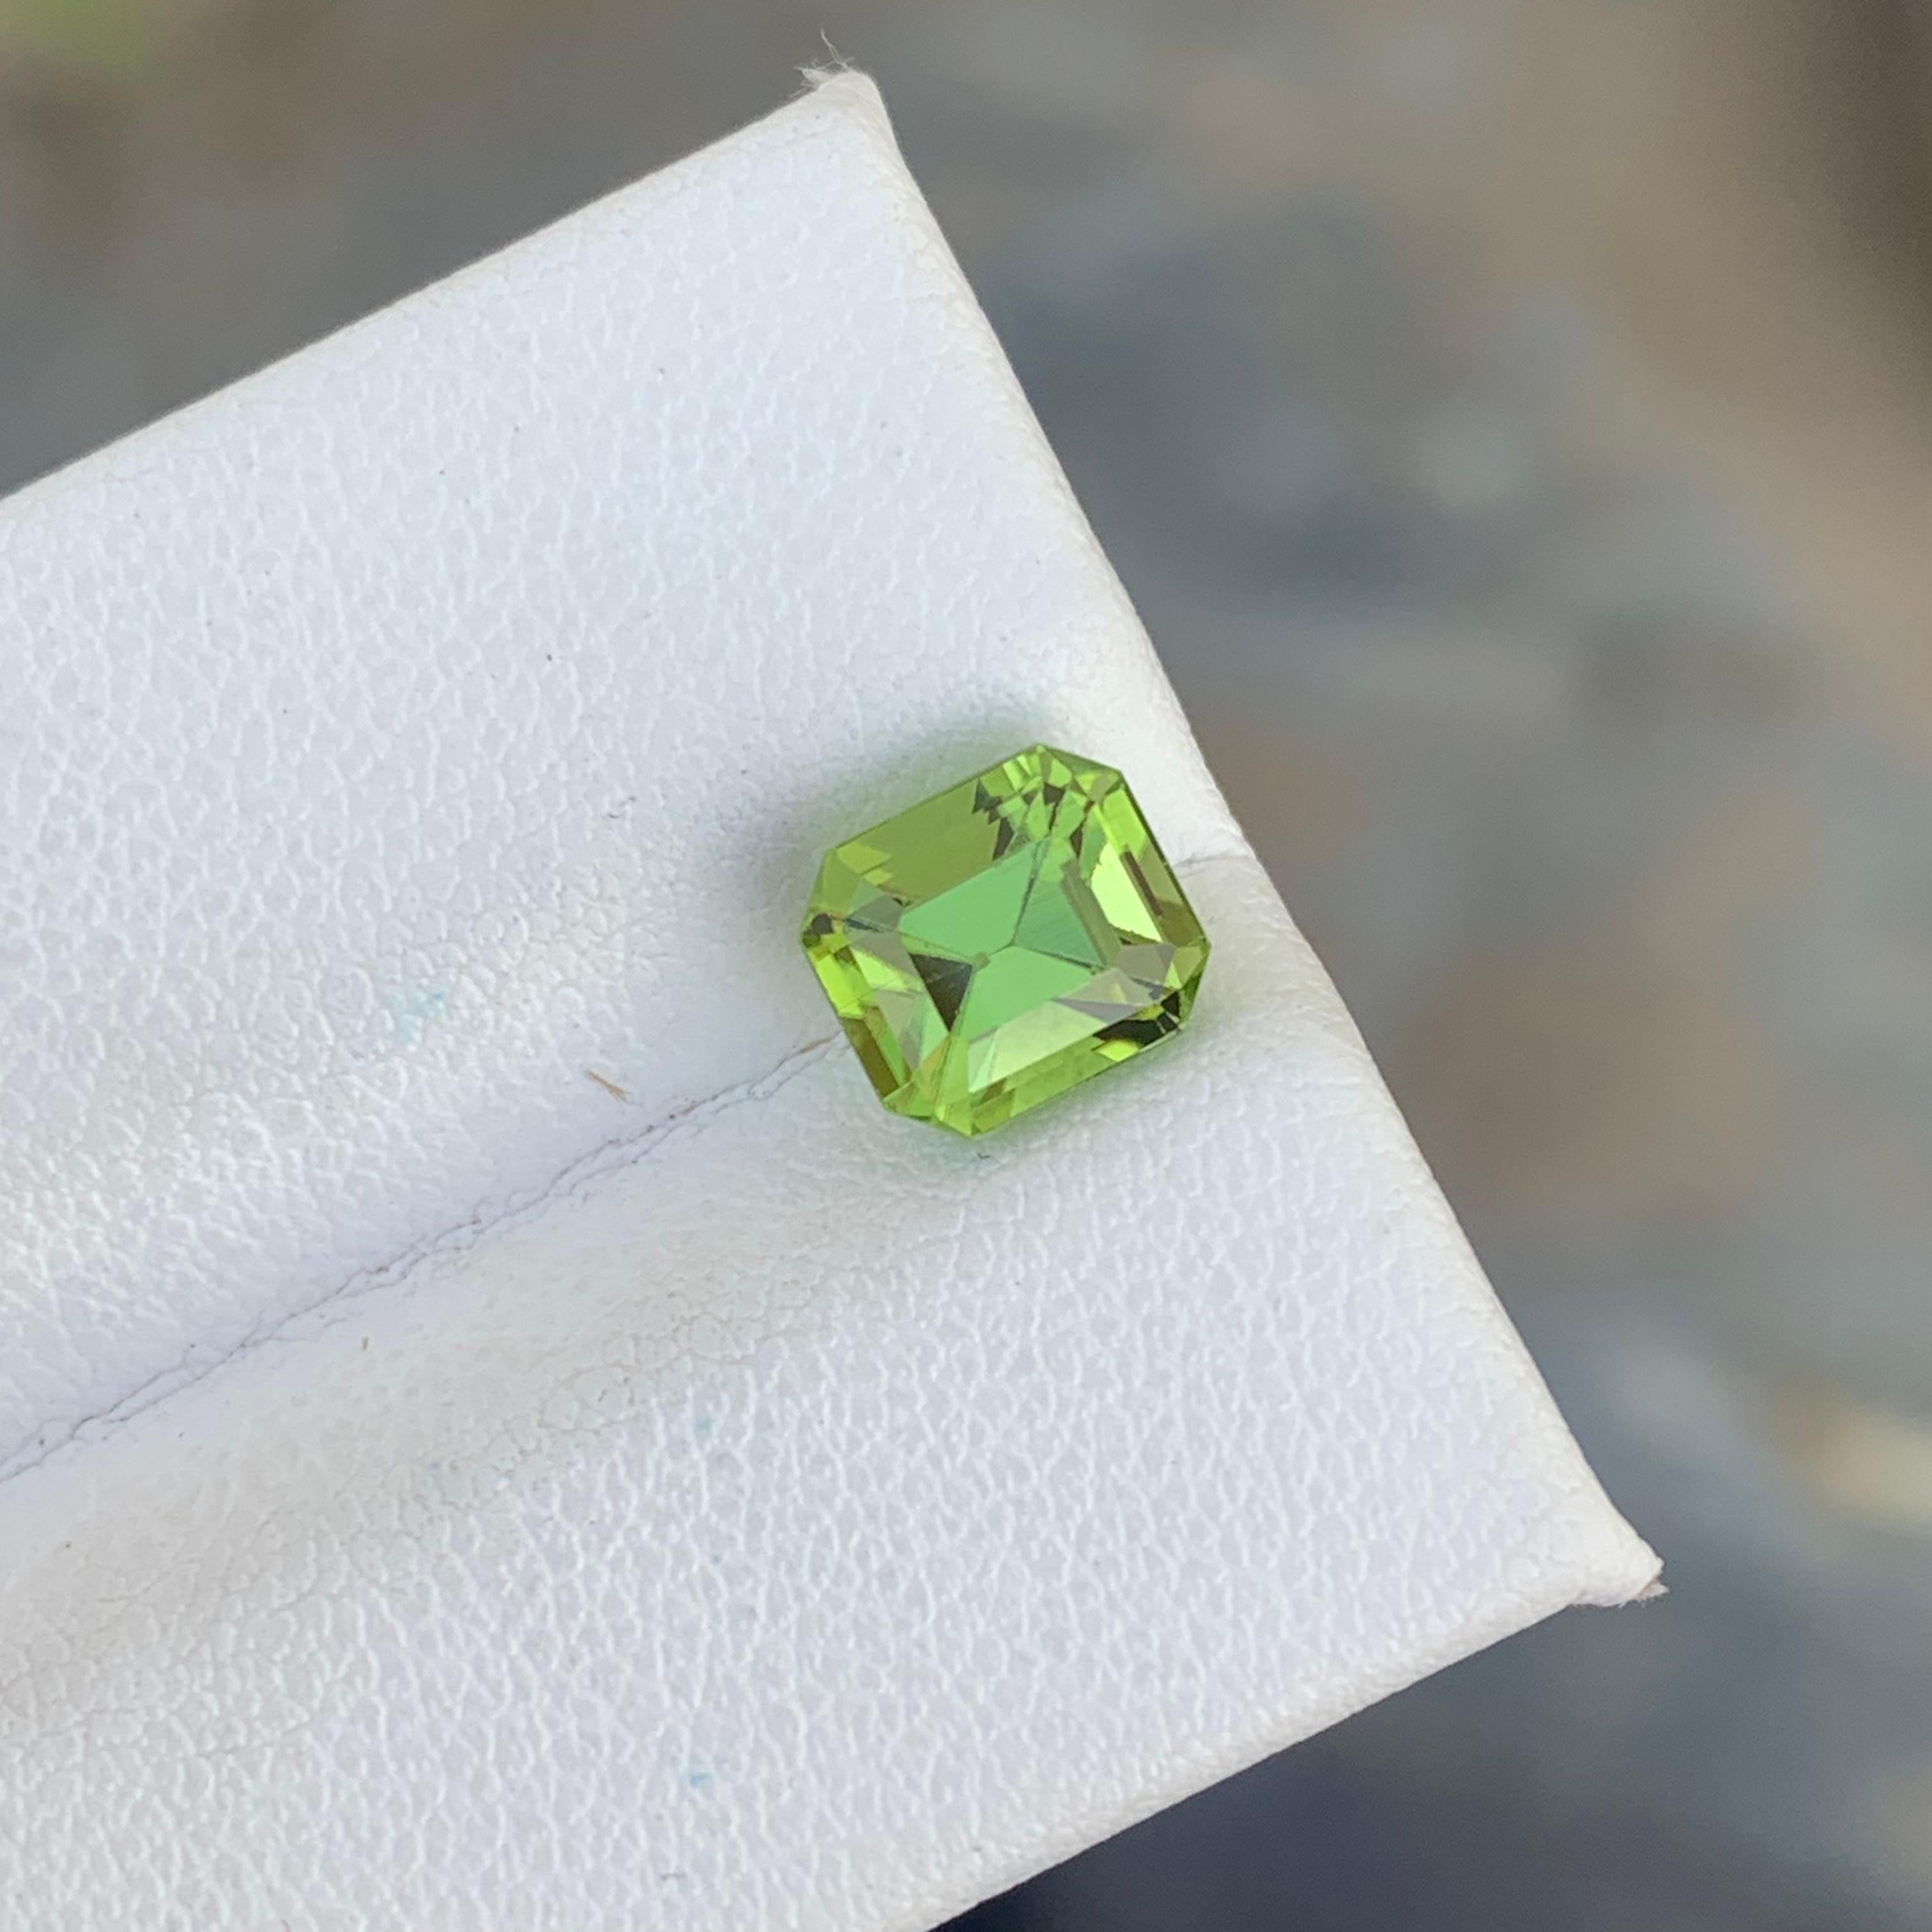 2.0 Carat Natural Loose Apple Green Peridot Gemstone For Ring Jewelry Making For Sale 2